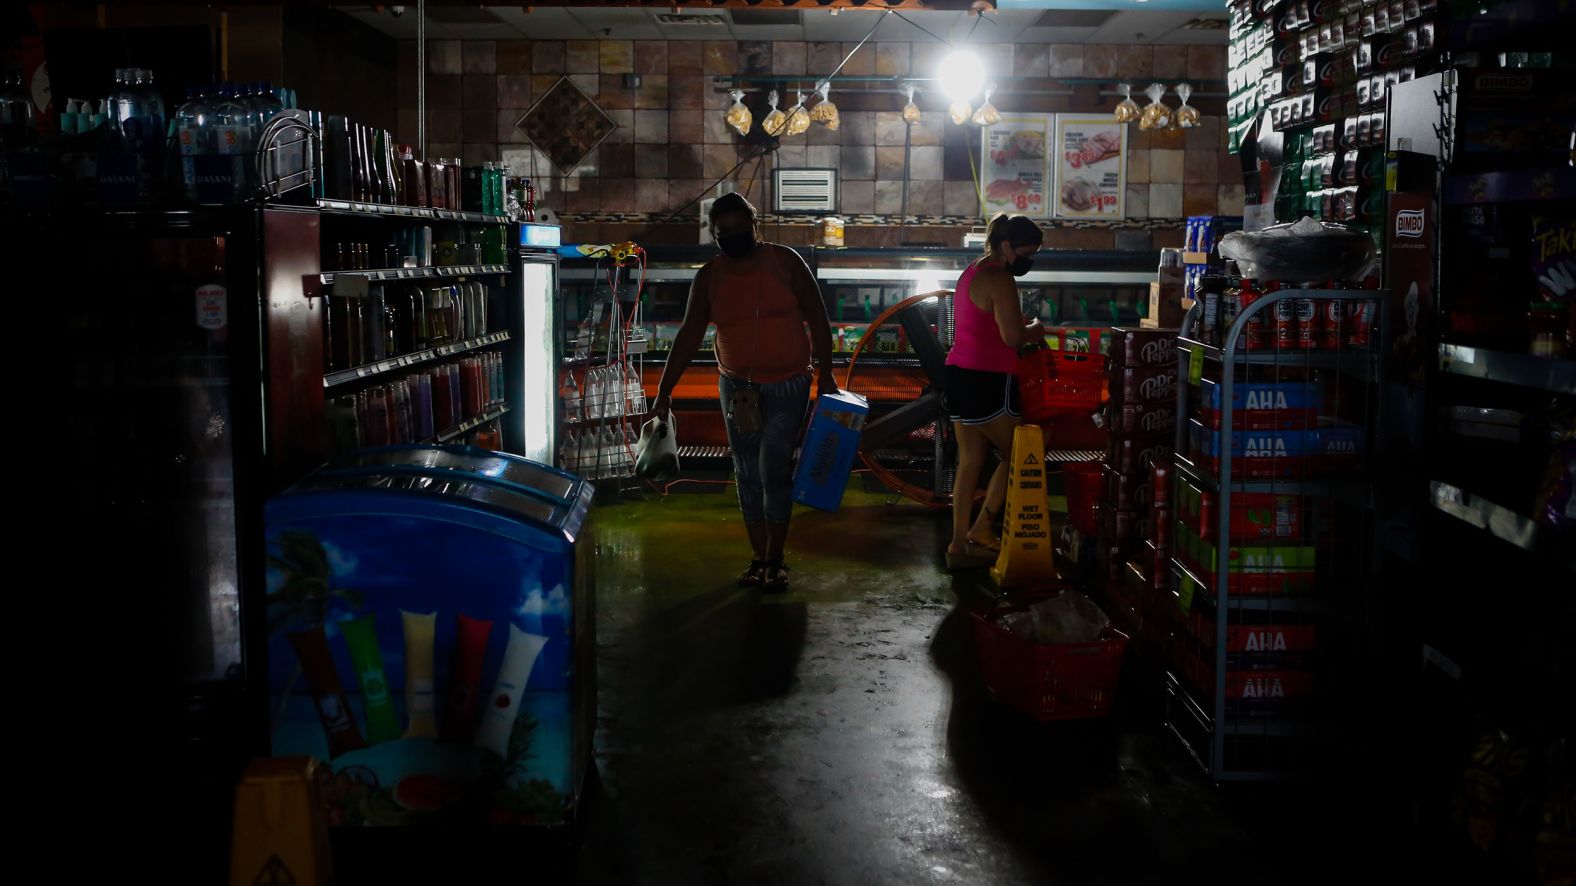 Shoppers buy supplies at a grocery store in New Orleans despite the power still being out on Thursday, September 2.